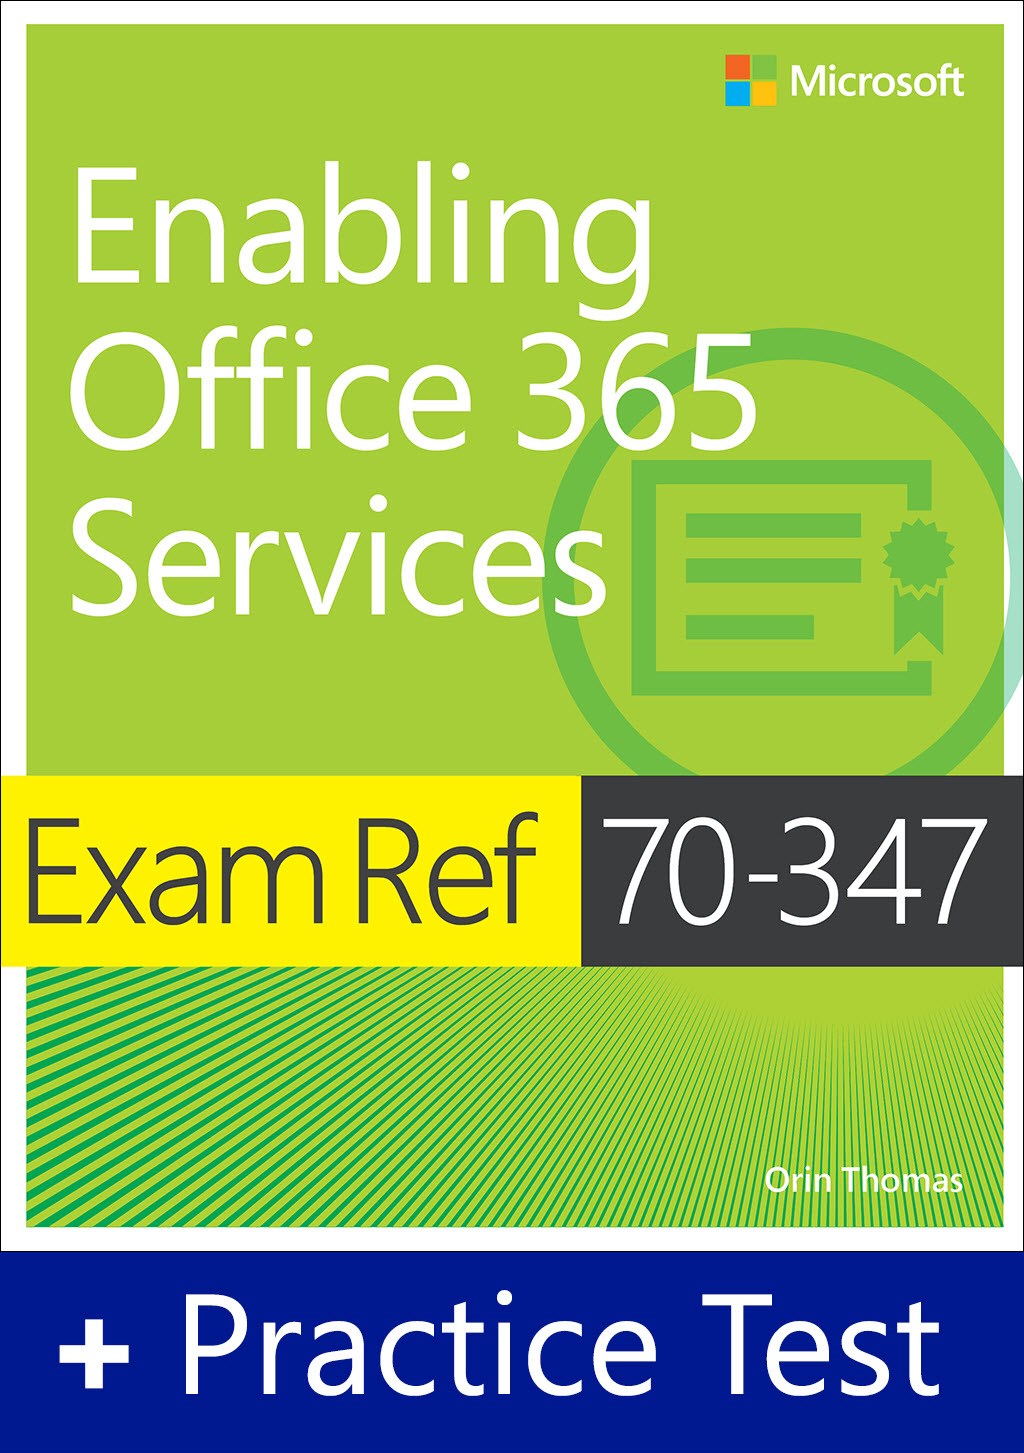 Exam Ref 70-347 Enabling Office 365 Services with Practice Test